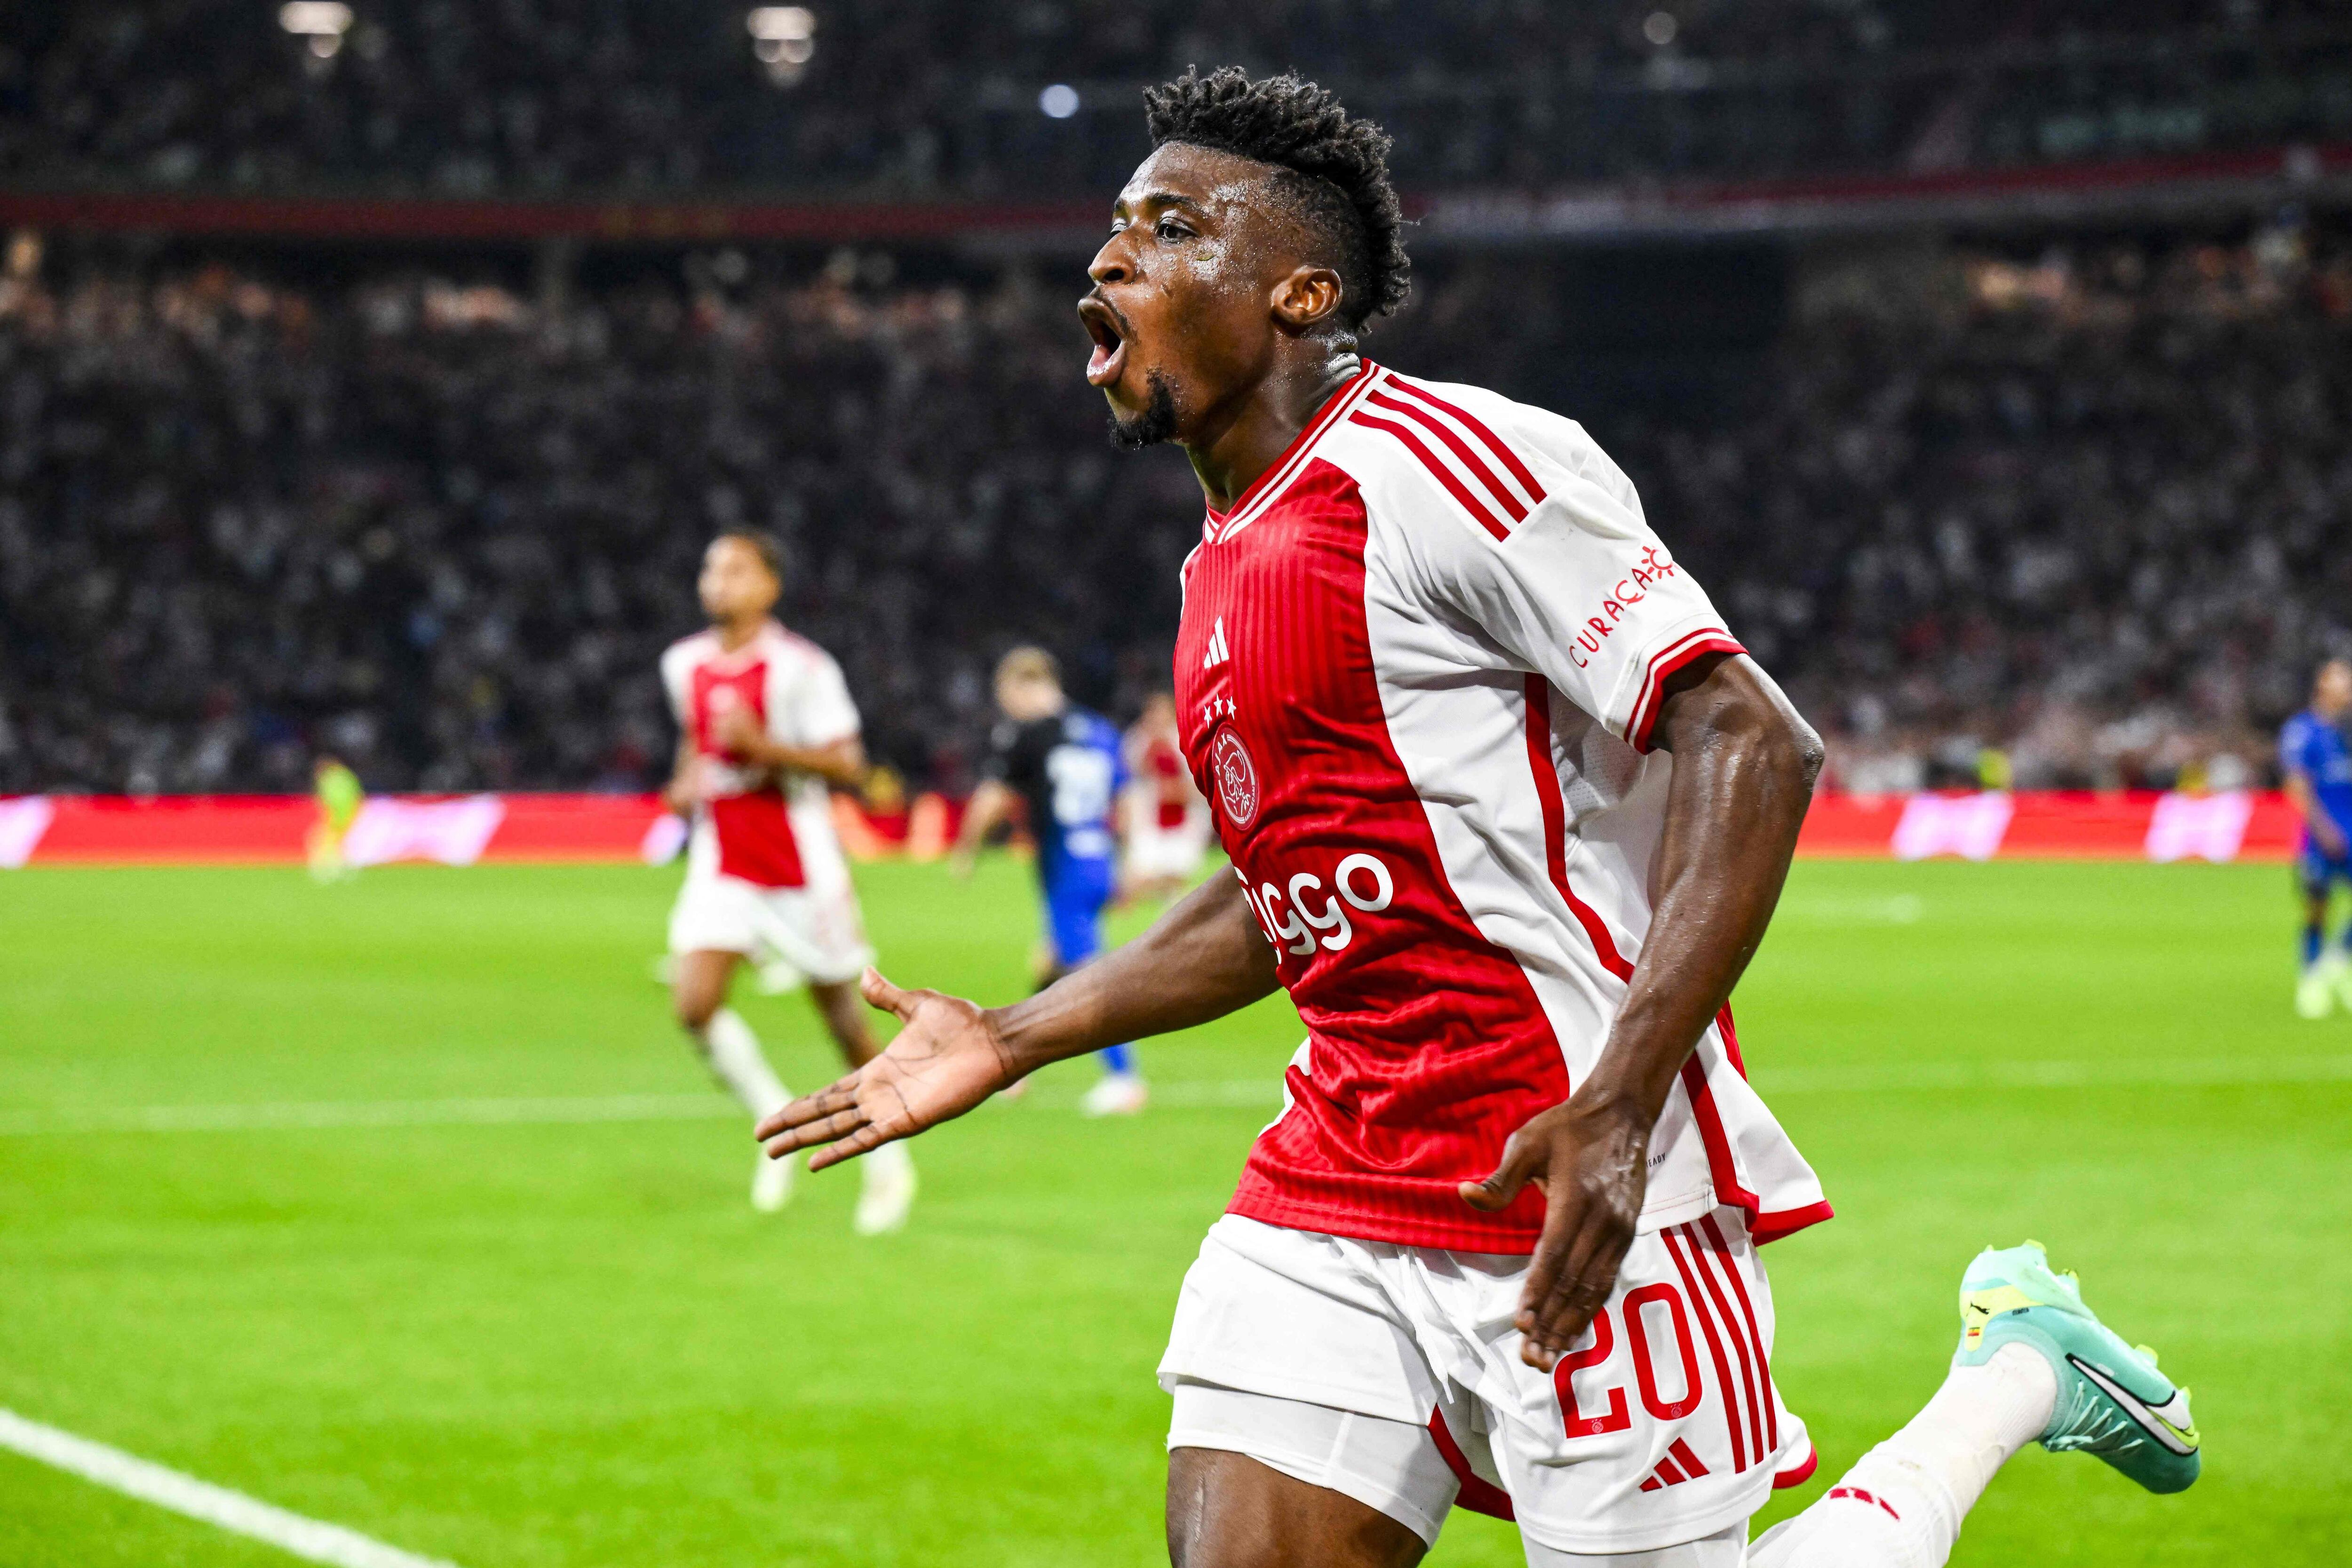 Ajax's Ghanaian midfielder #20 Mohammed Kudus celebrates after scoring he team's second goal during the Dutch Eredivisie premier league football match between Ajax Amsterdam and Heracles Almelo at the Johan Cruijff Arena in Amsterdam, on August 12, 2023. (Photo by Olaf Kraak / ANP / AFP) / Netherlands OUT